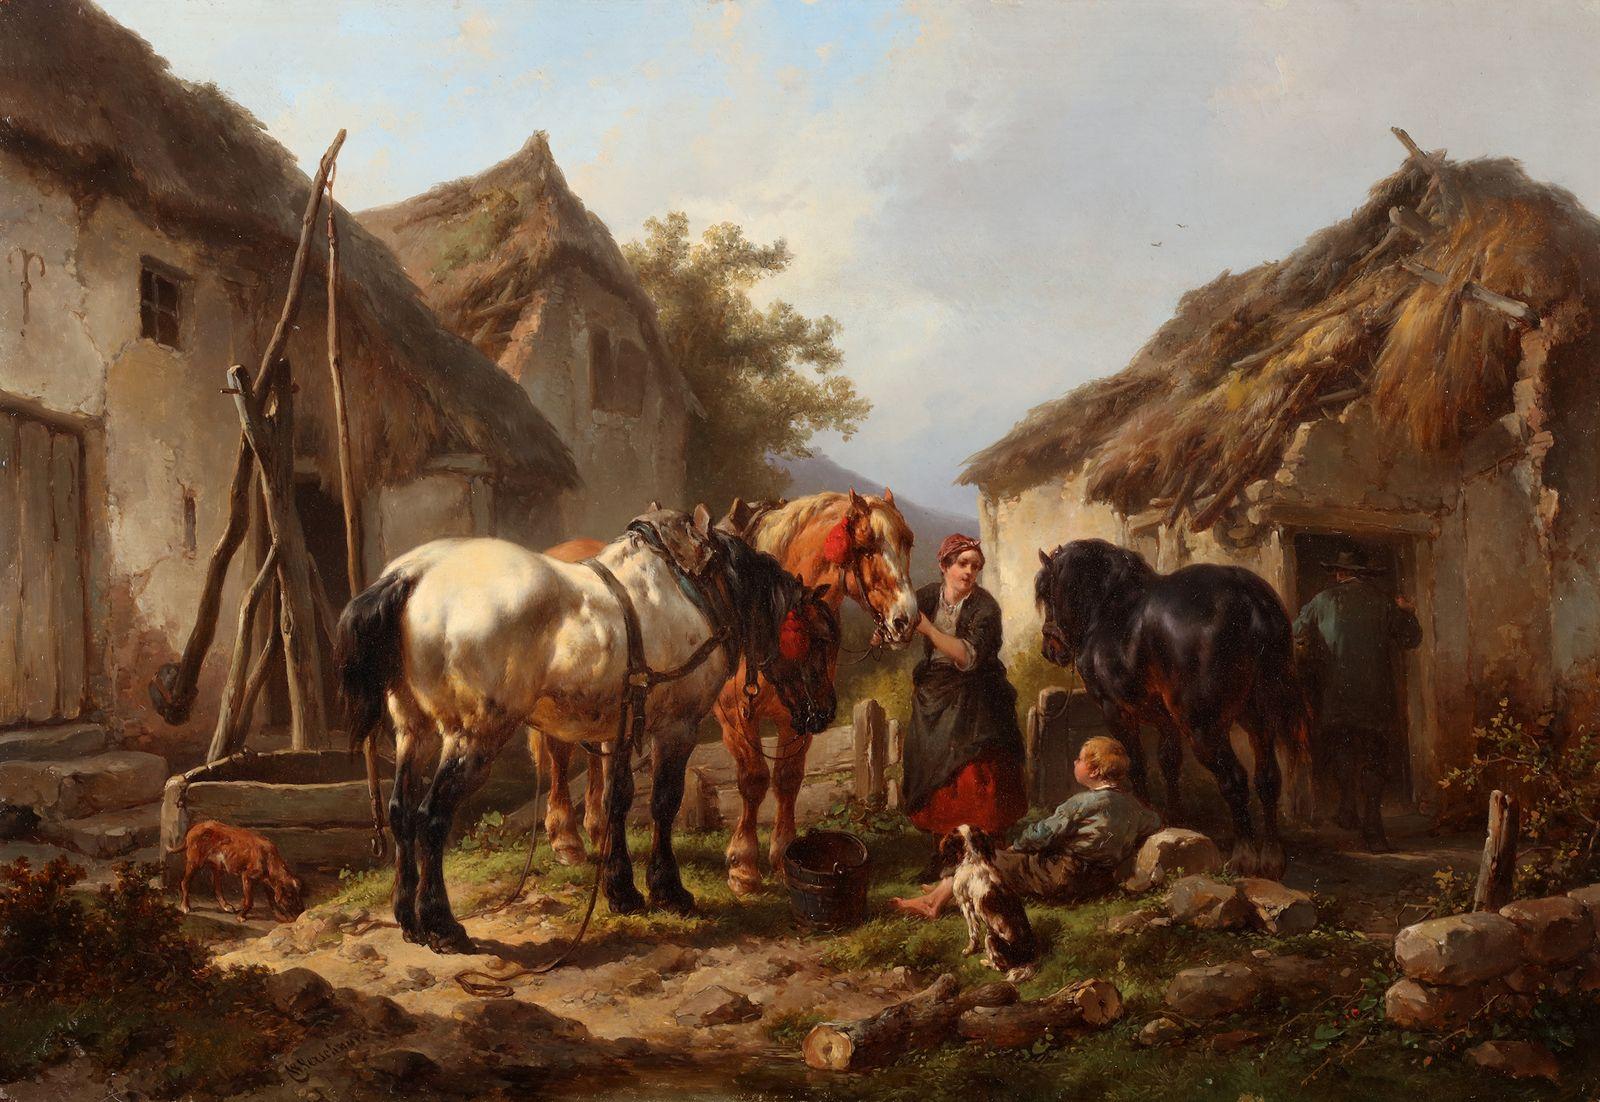 Tending the horses - Painting by Wouterus Verschuur l